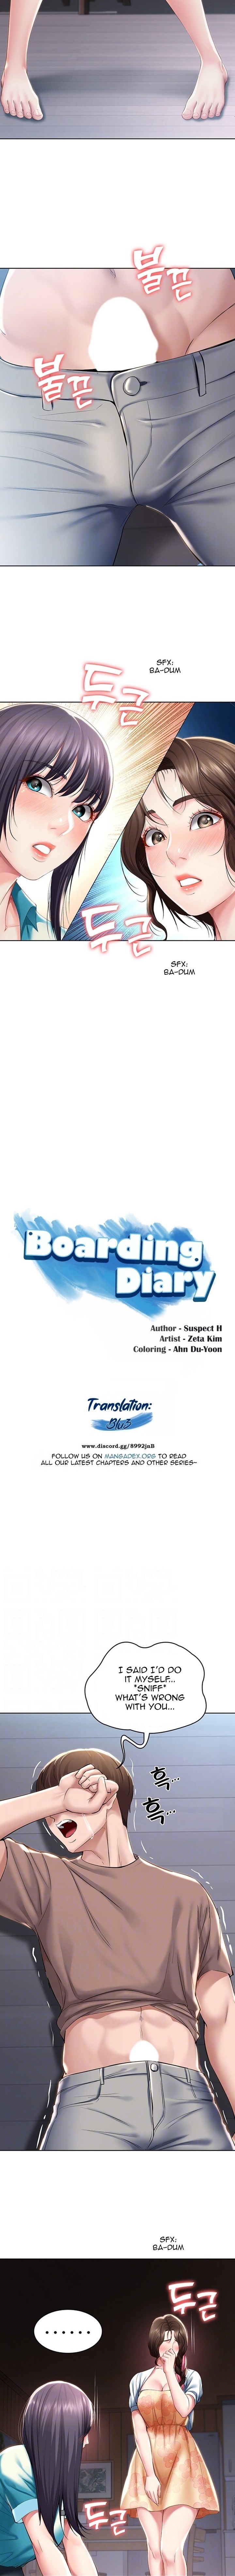 Boarding Diary - Page 2